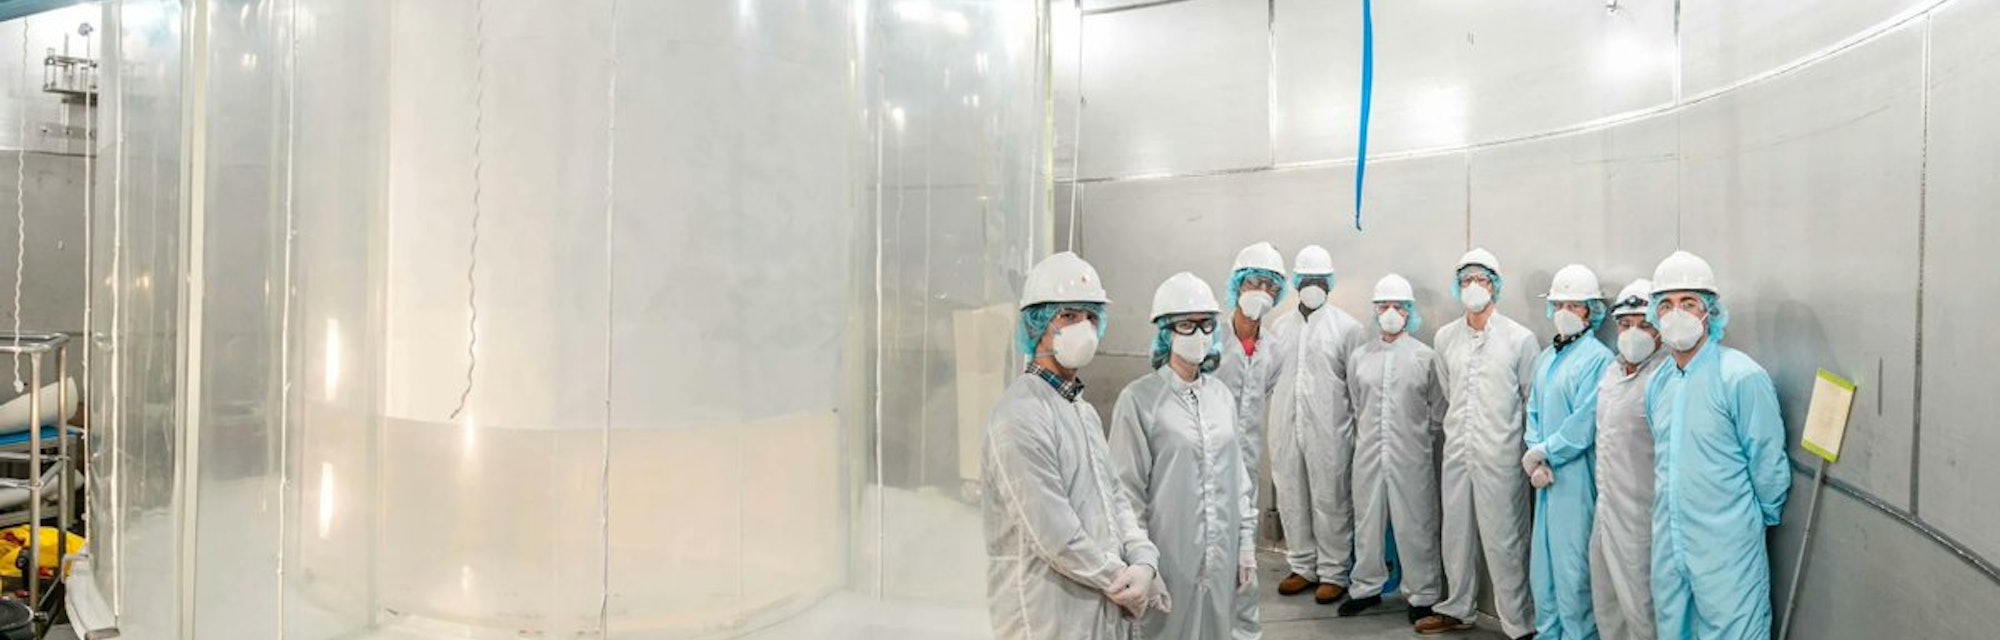 Some of the team members responsible for the LUX-ZEPLIN experiment. 